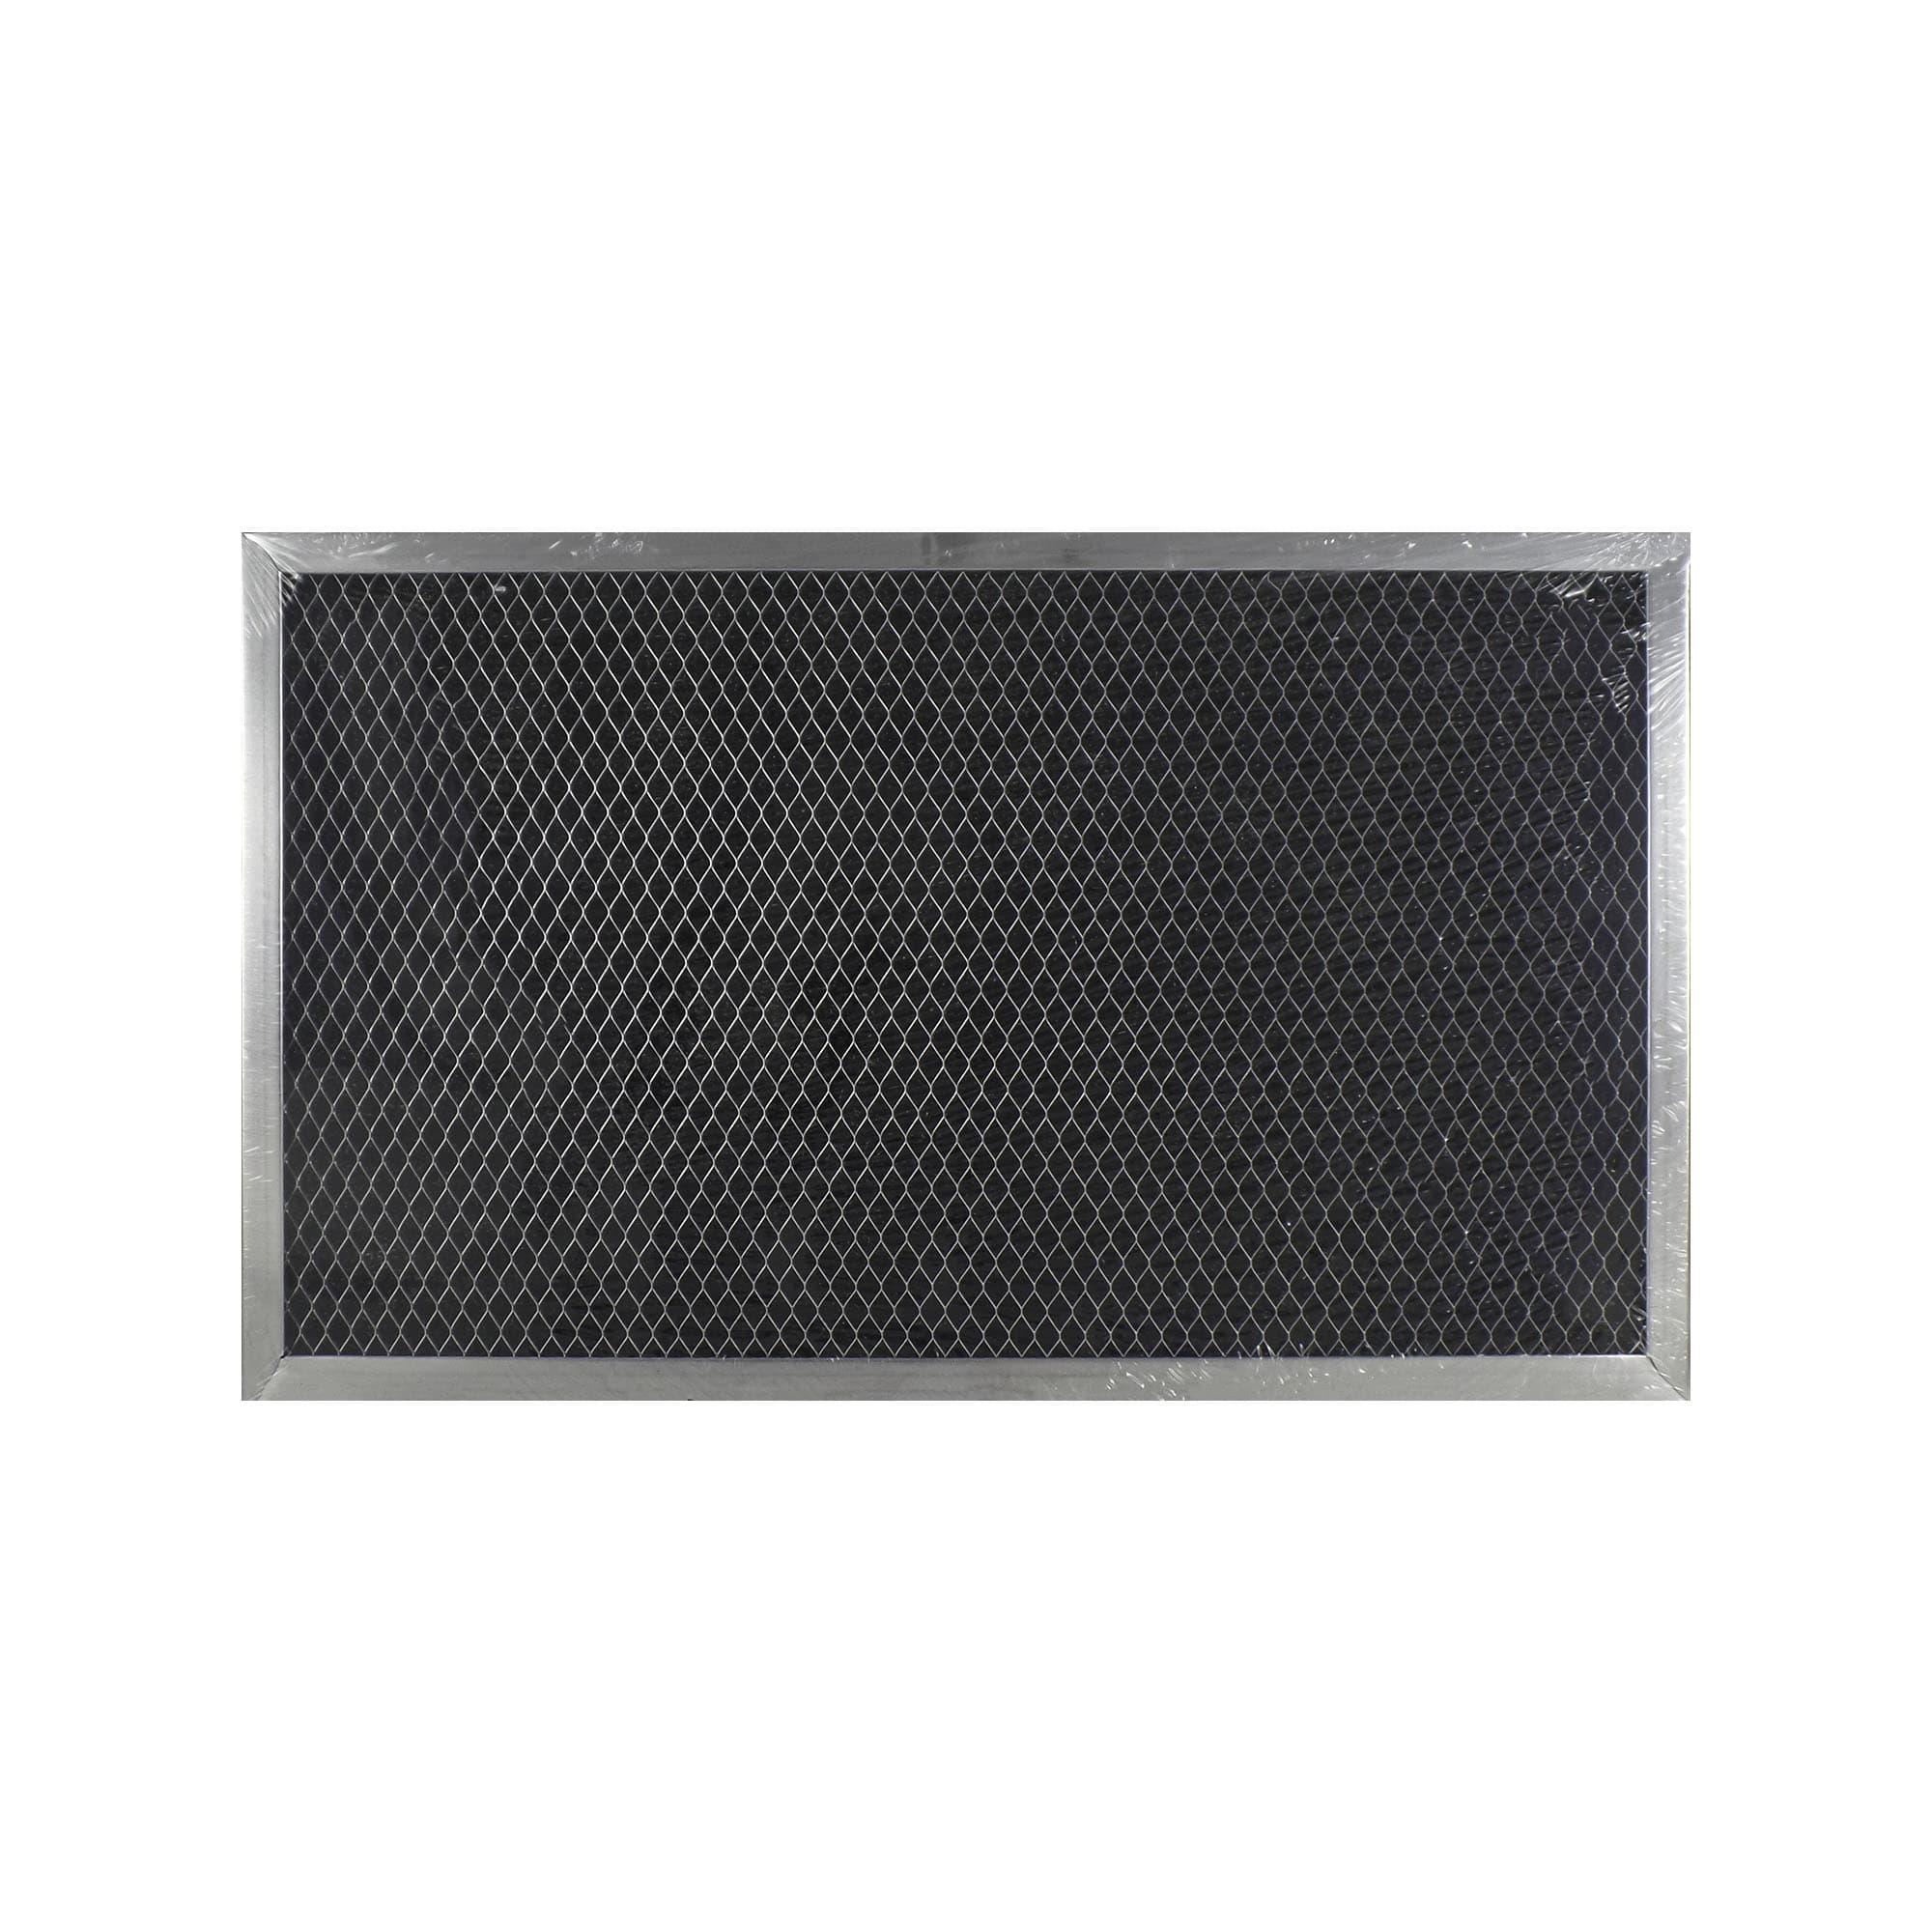 Details about   Kitchenaire compatible KA240 Replacmeent Hood Vent Aluminum mesh grease filter 